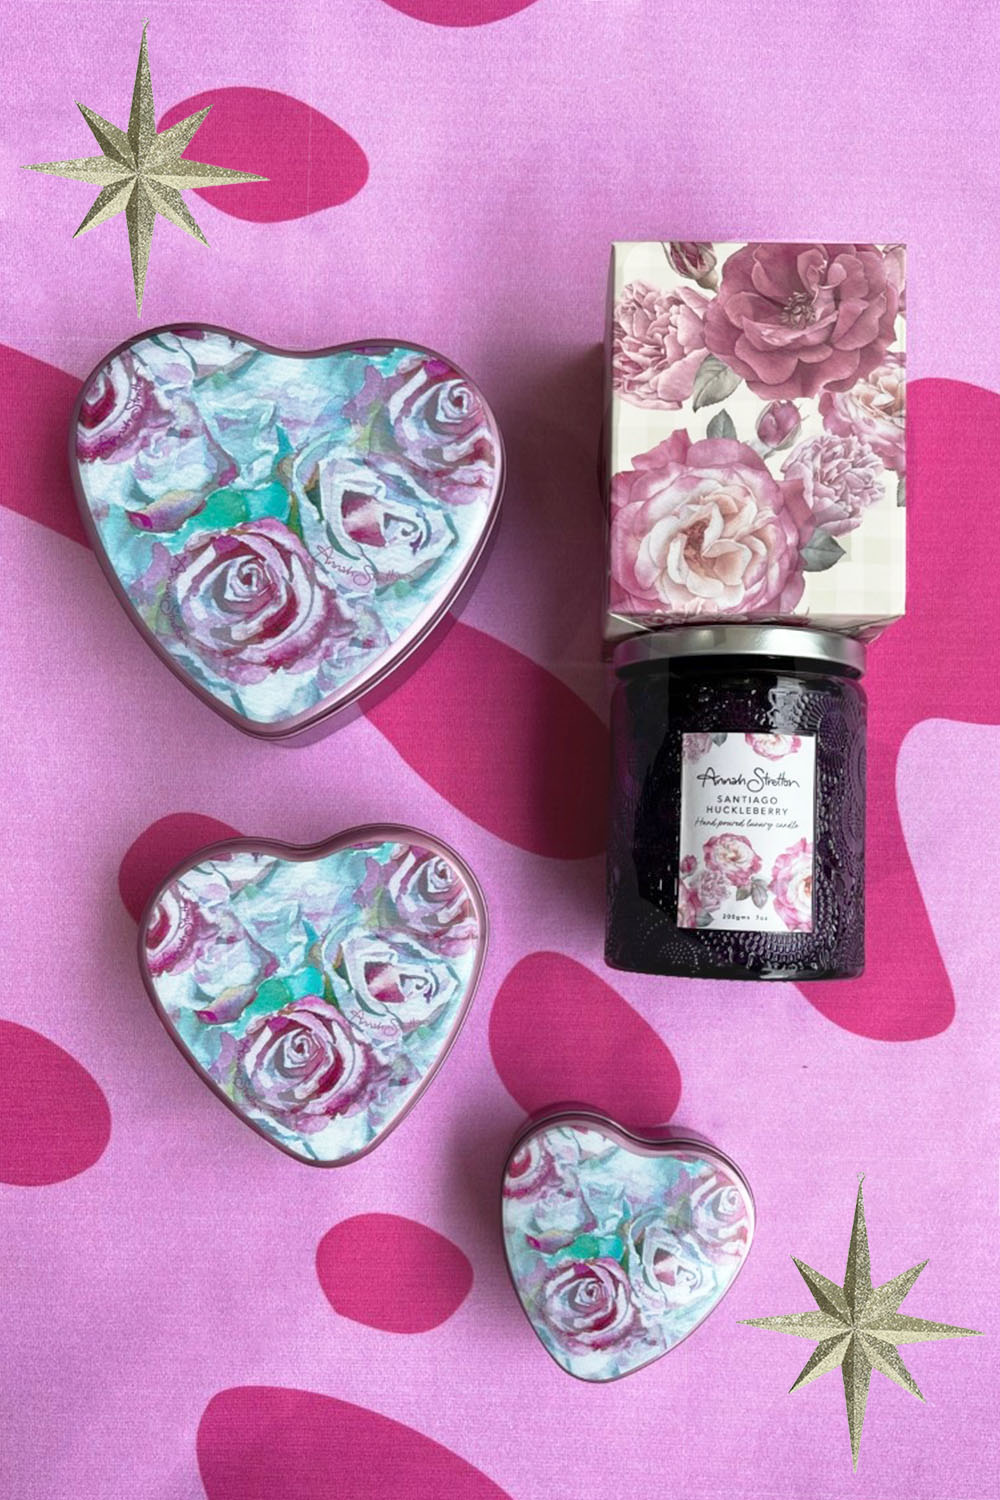 annah stretton magic tins christmas gift pack, pink stacking heart tins and candle